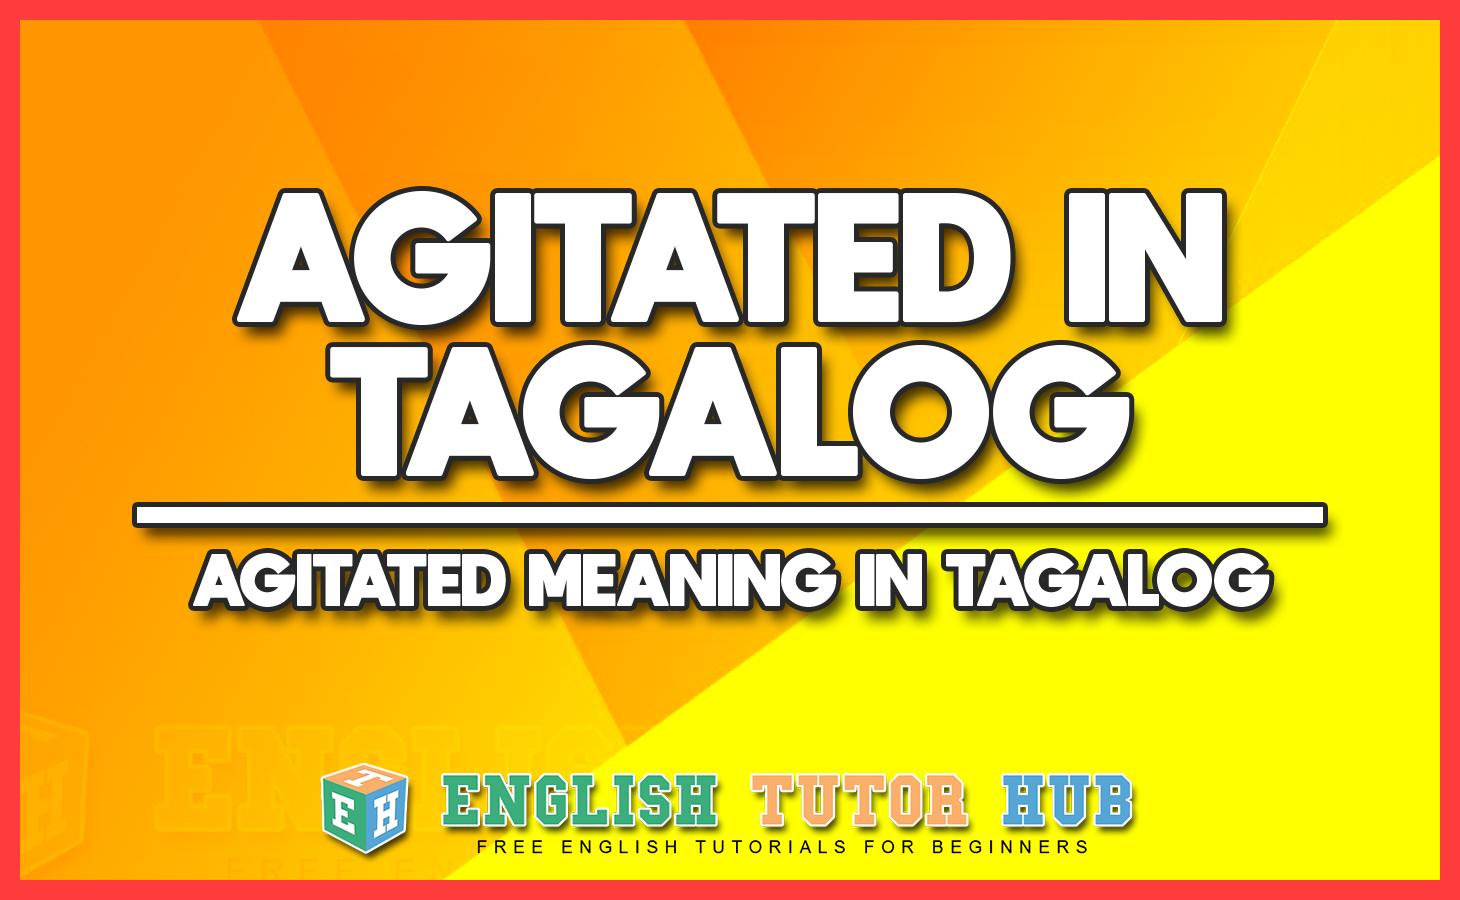 AGITATED IN TAGALOG - AGITATED MEANING IN TAGALOG